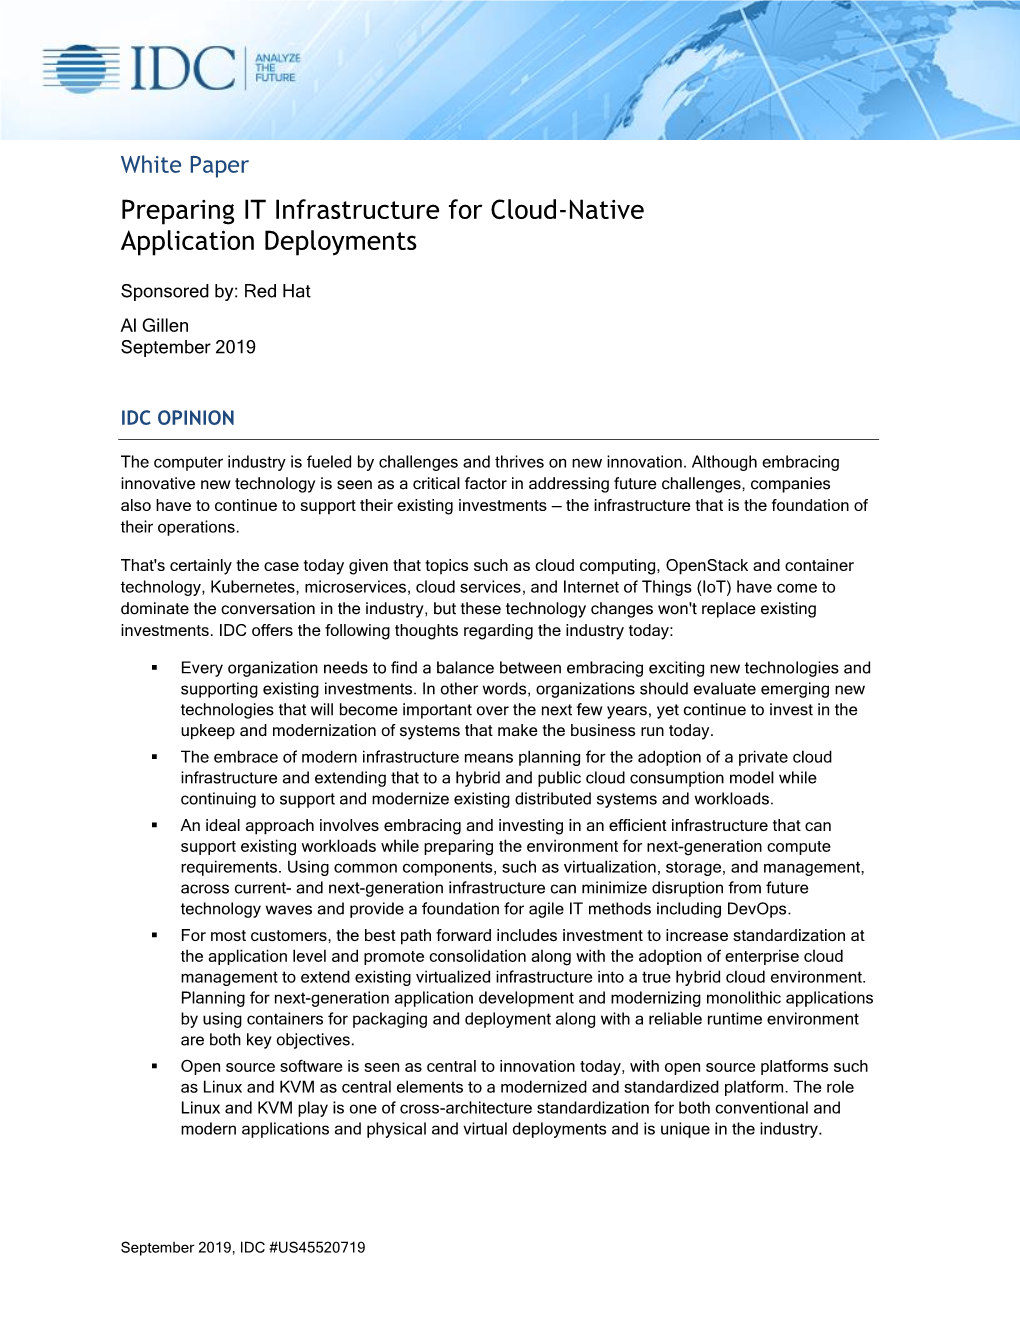 Preparing IT Infrastructure for Cloud-Native Application Deployments